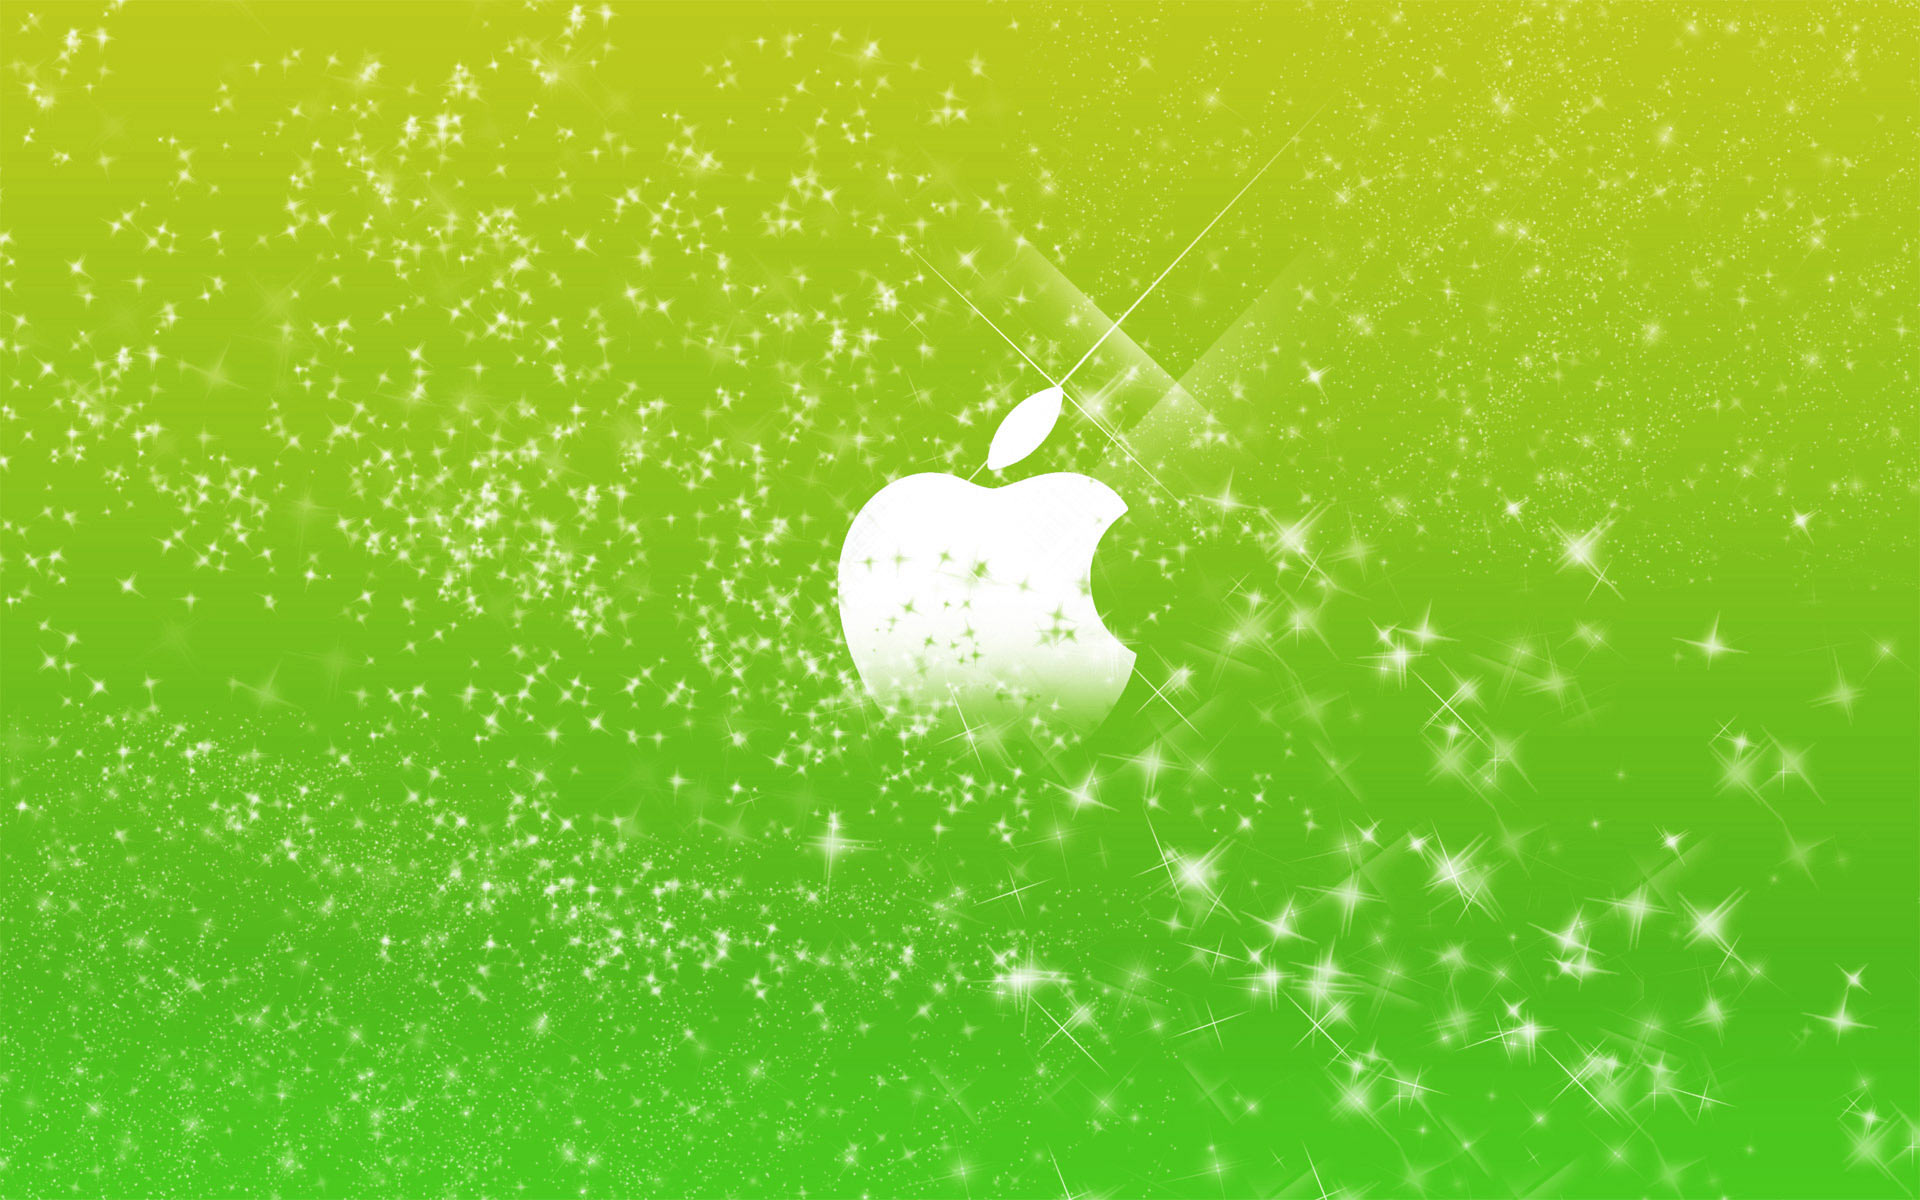 Get Green Background For Mac Wallpaper And Make This